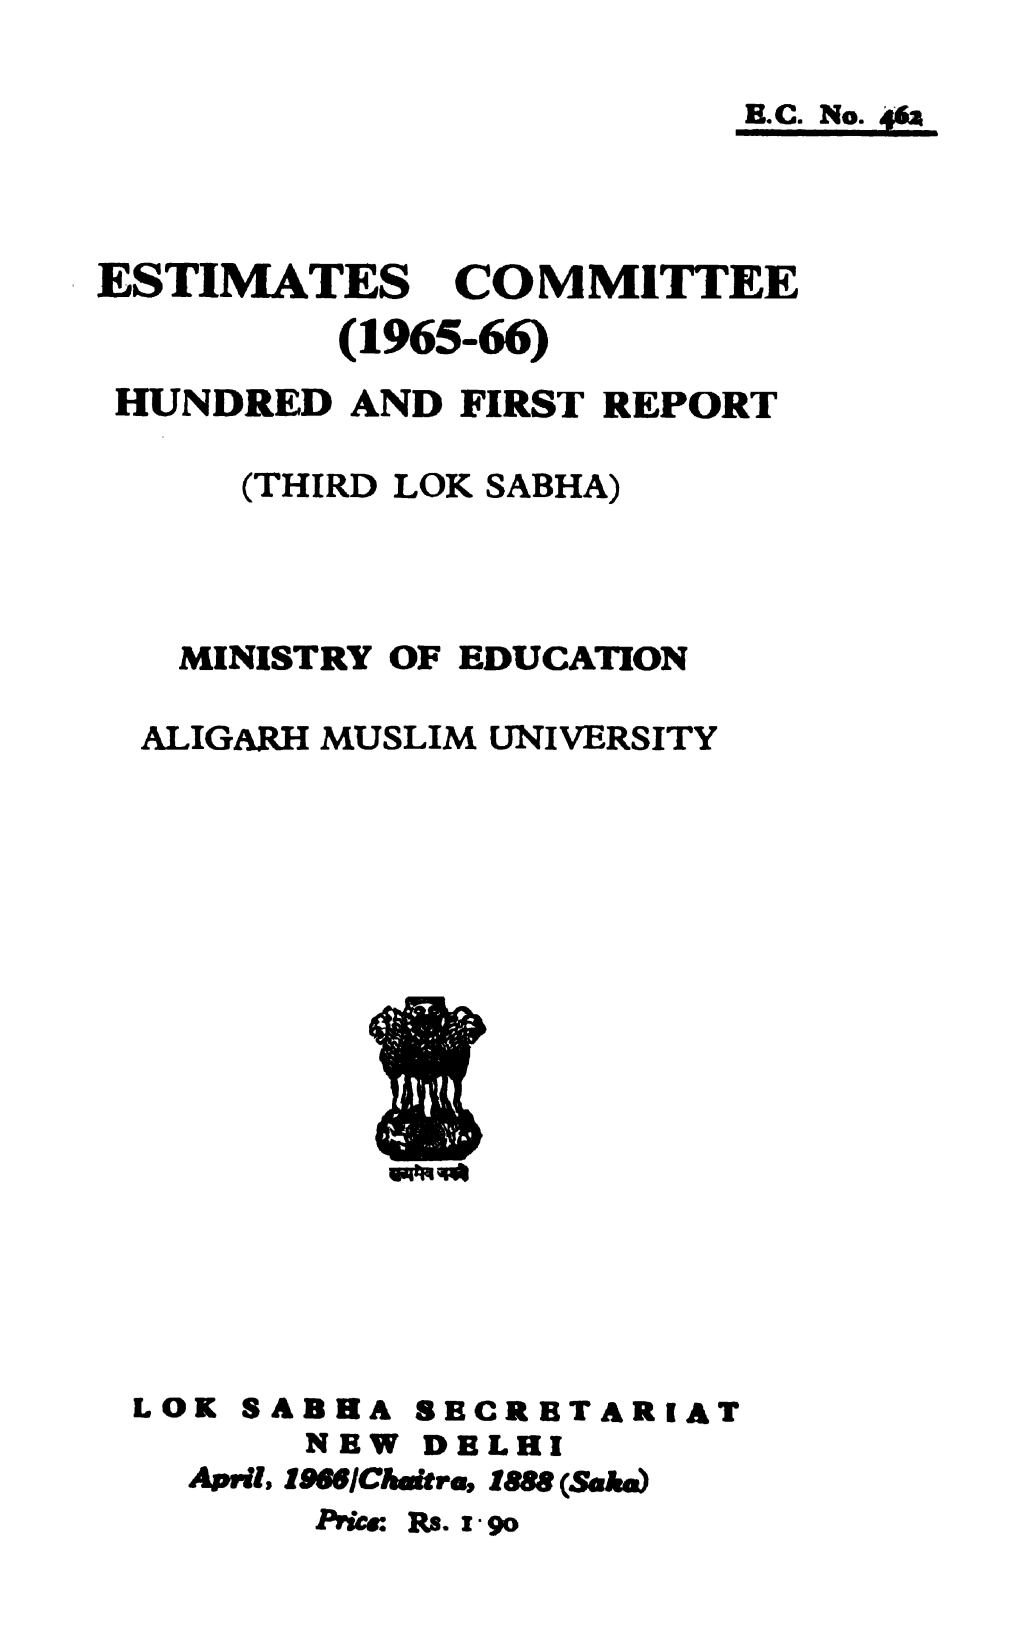 Estimates Committee (1965 -66) Hundred and First Report